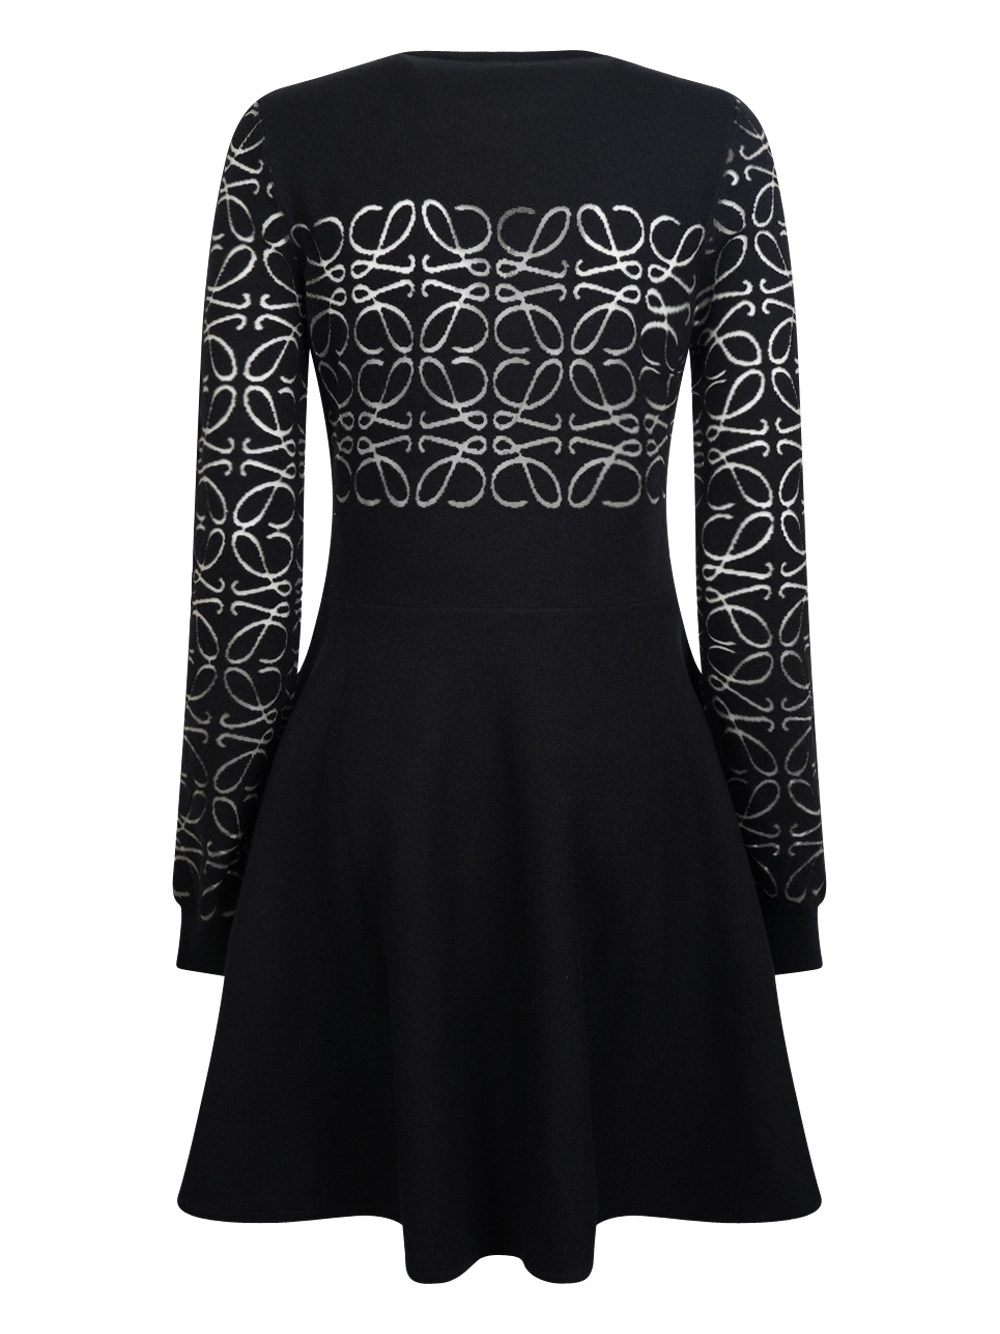 loewe ANAGRAM DRESS available on montiboutique.com - 46542